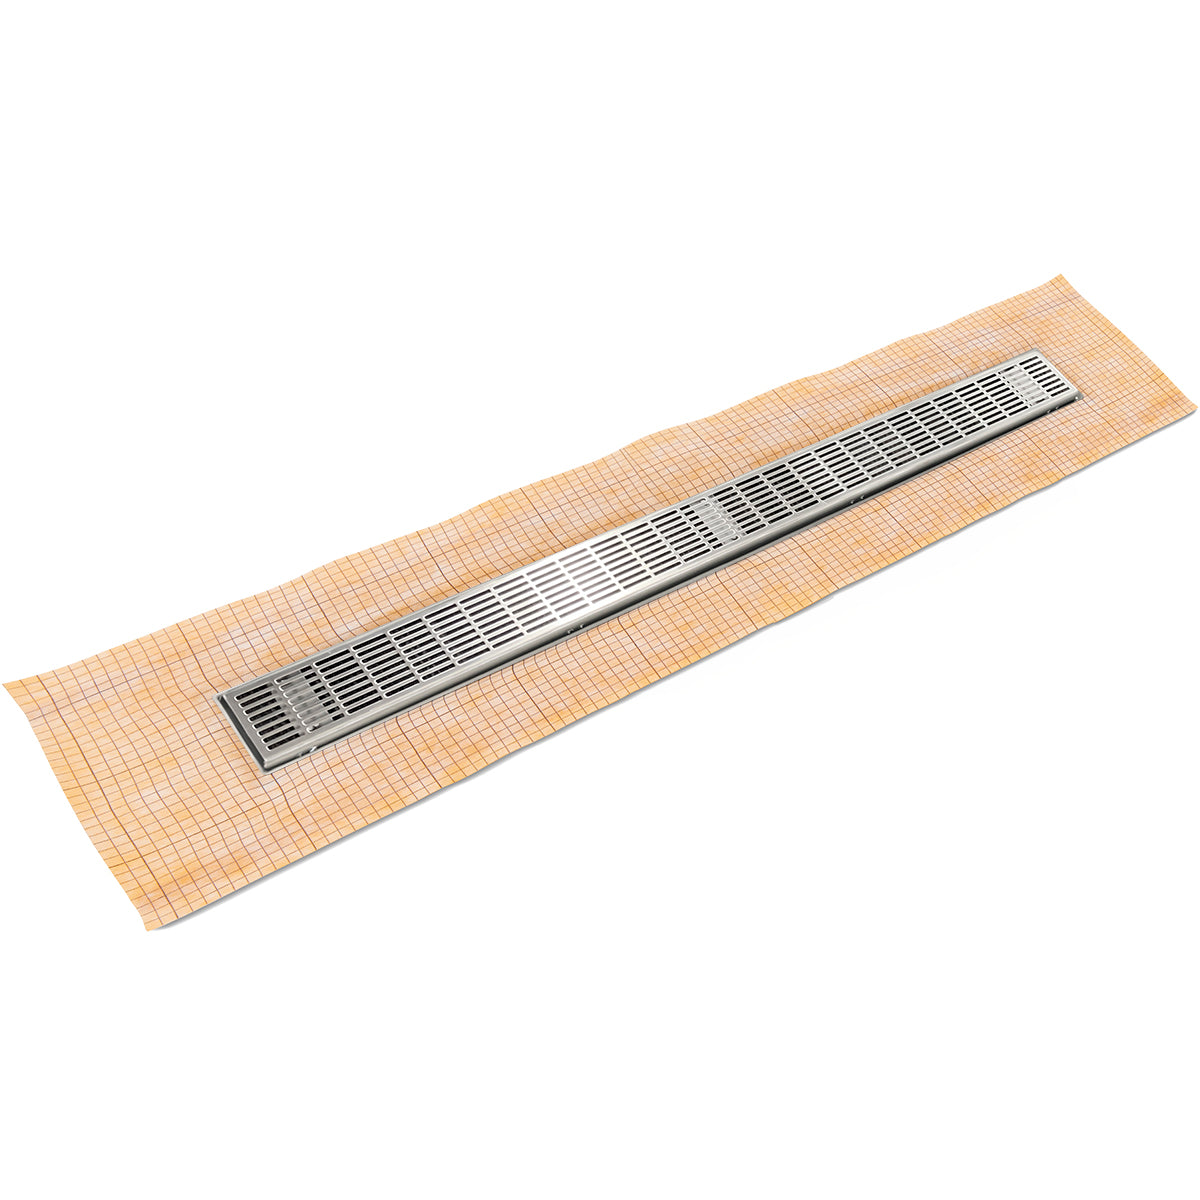 Infinity Drain 60" FCS Series Schluter-Kerdi - Fixed Flange Linear Drain Kit with 2 1/2" Perforated Slotted Grate